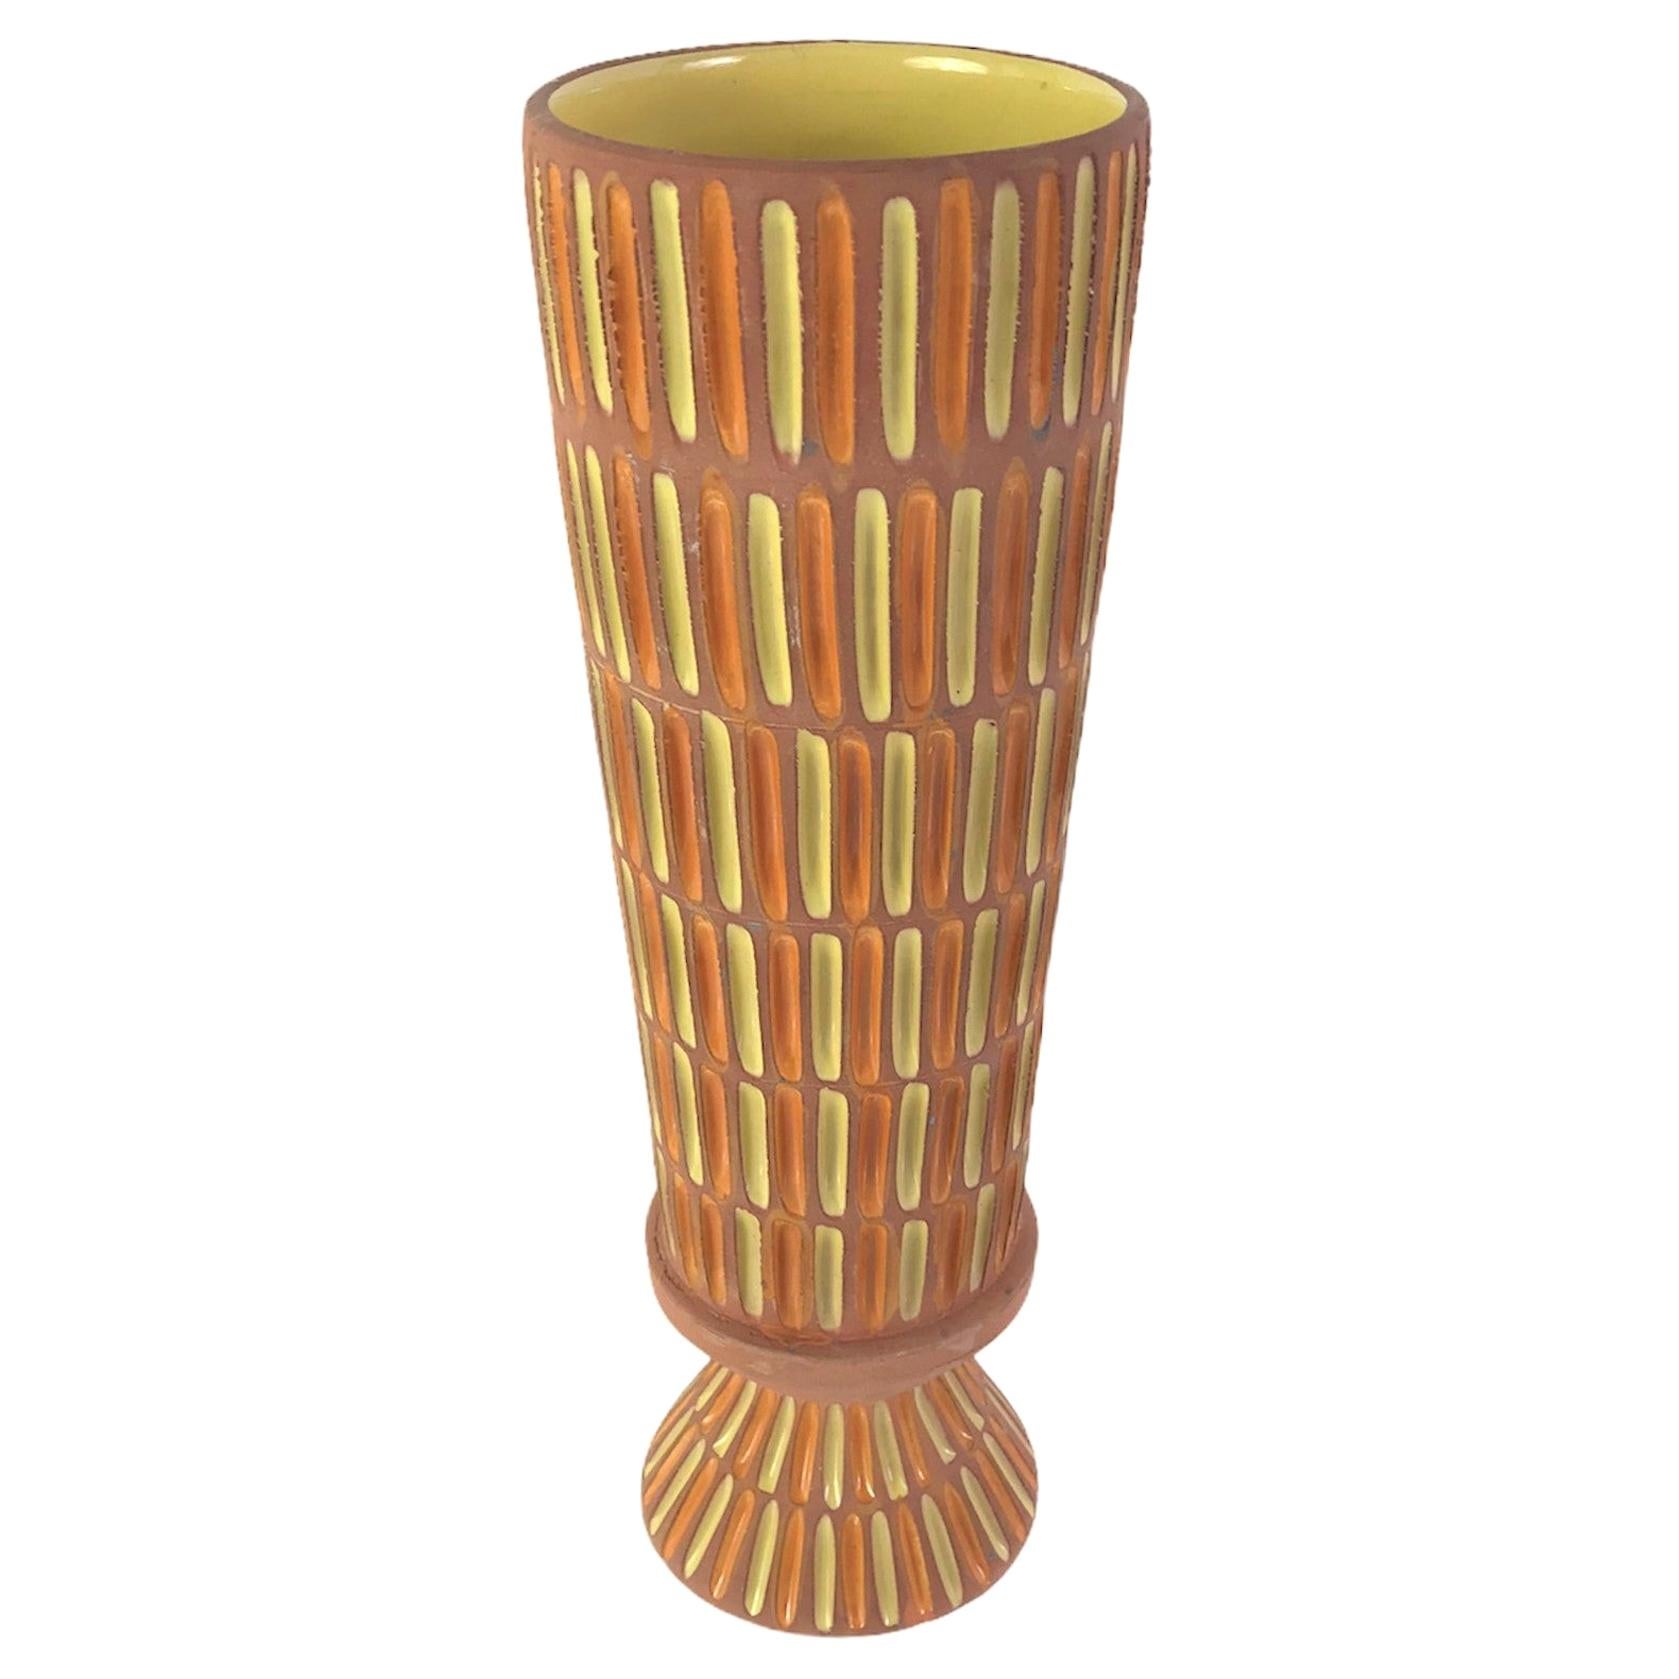 Bitossi Midcentury Italian Tall Footed Vessel for Raymor by Aldo Londi, 1960s